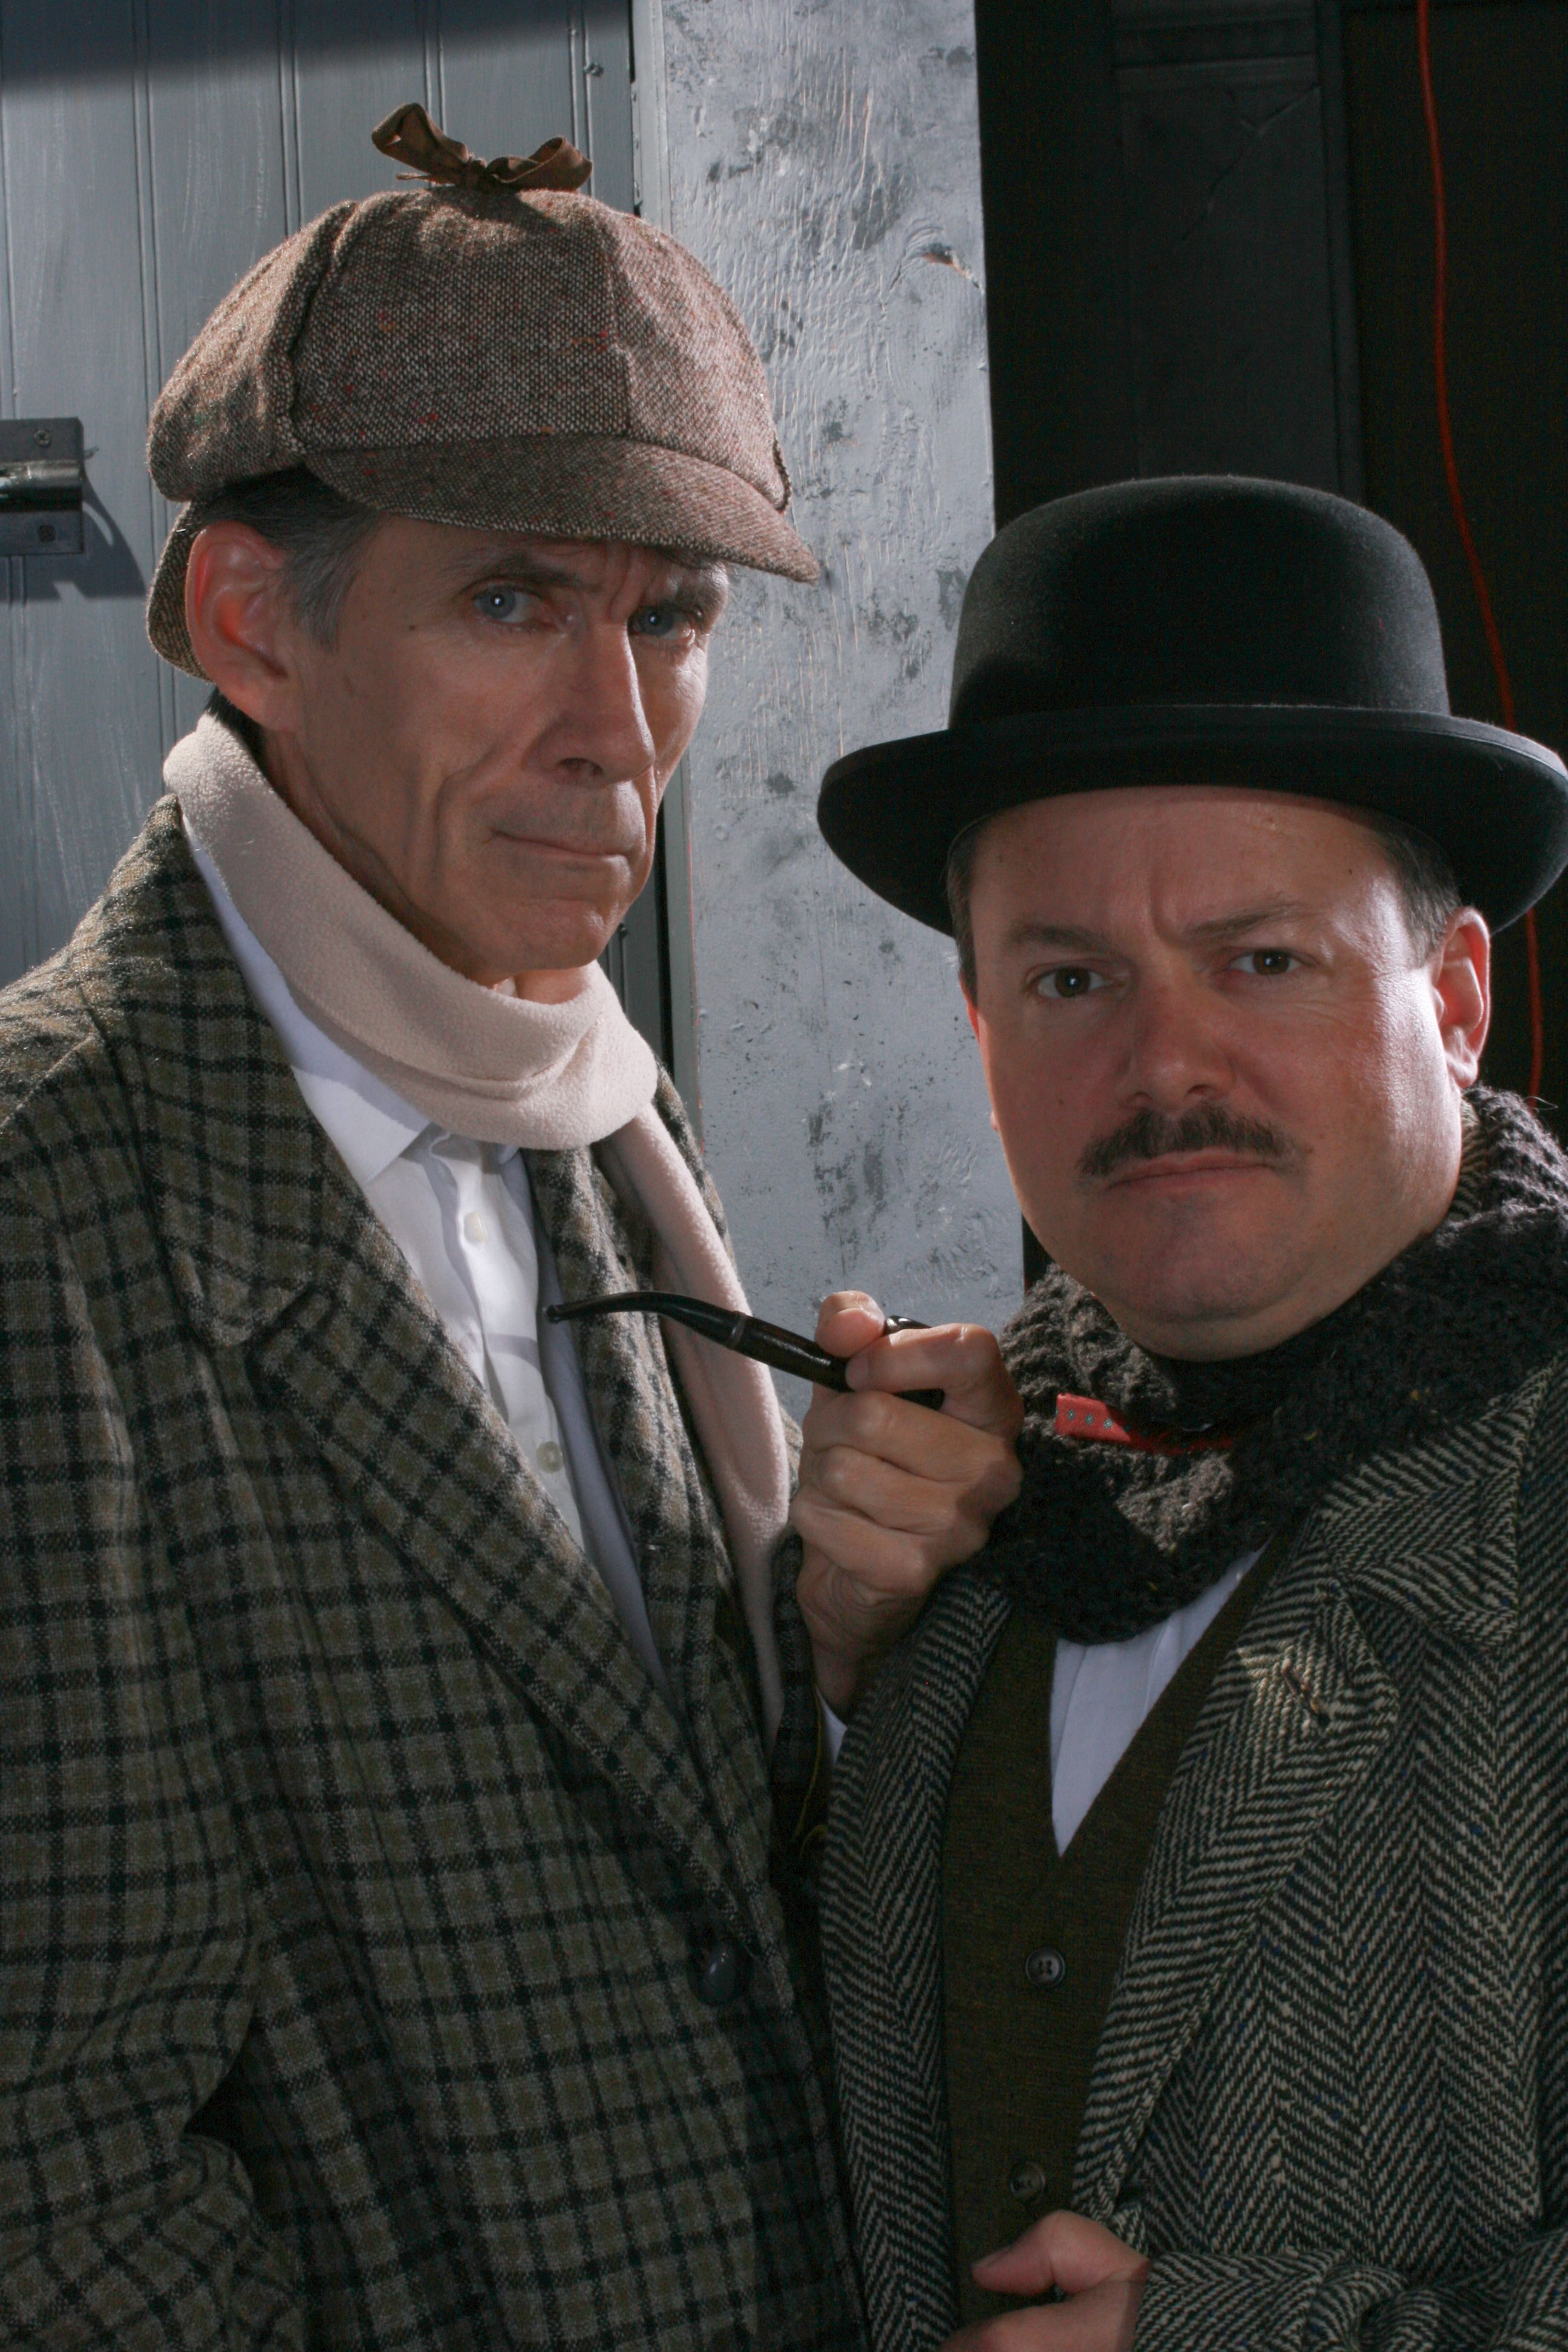 Holmes and Watson - Sherlock Holmes and the Hound of the Baskervilles